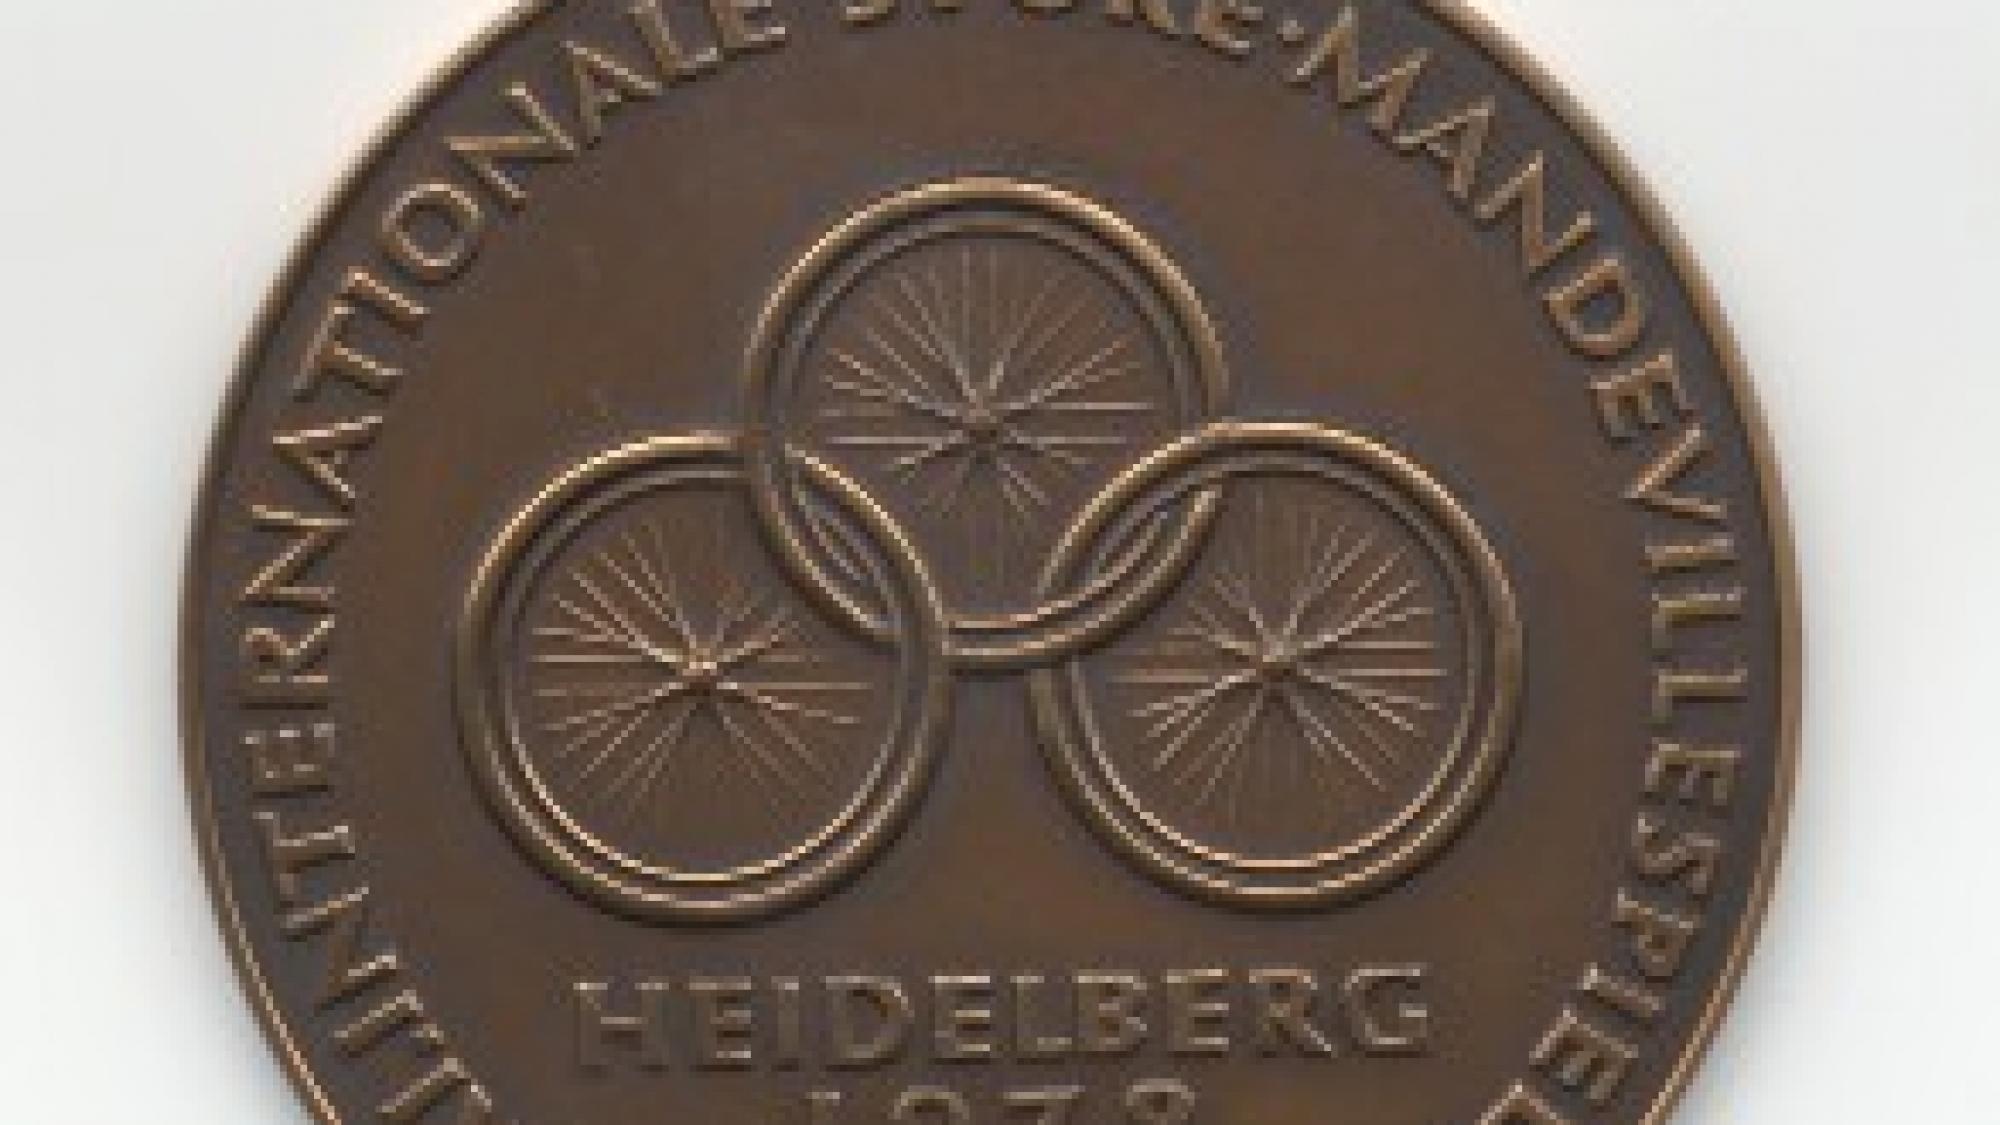 The medals of the Heidelberg 1972  Paralympic Games